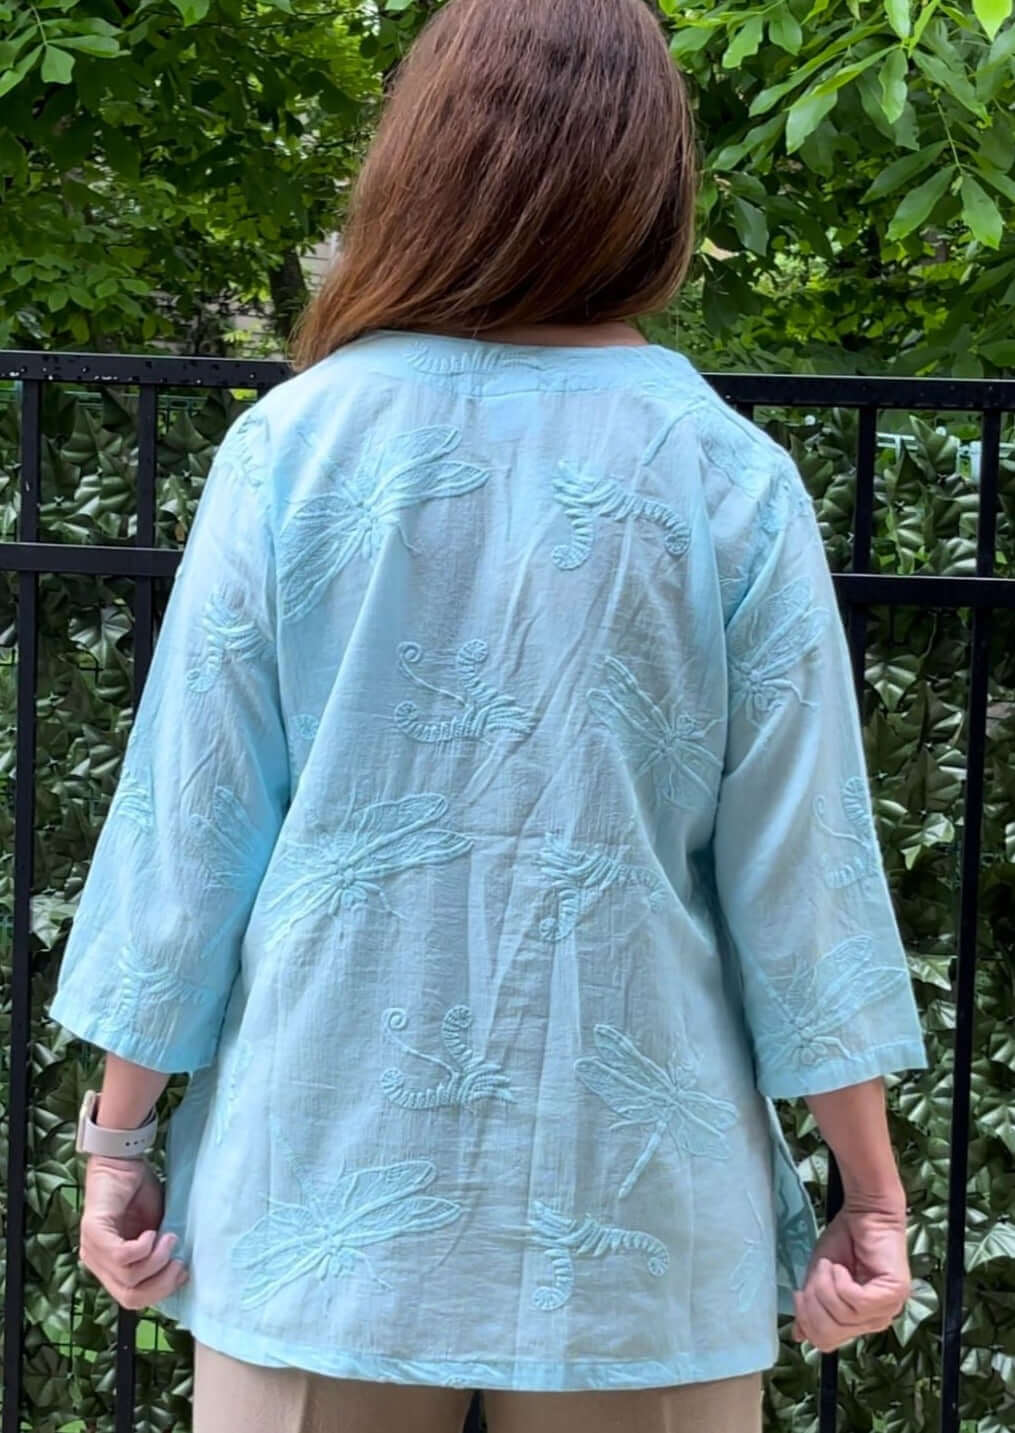 Made in USA Women's 100% Cotton Dragonfly Embroidered Lightweight V-Neck Top with 3/4 Sleeves in Aqua Blue | Classy Cozy Cool Women's Made in America Boutique